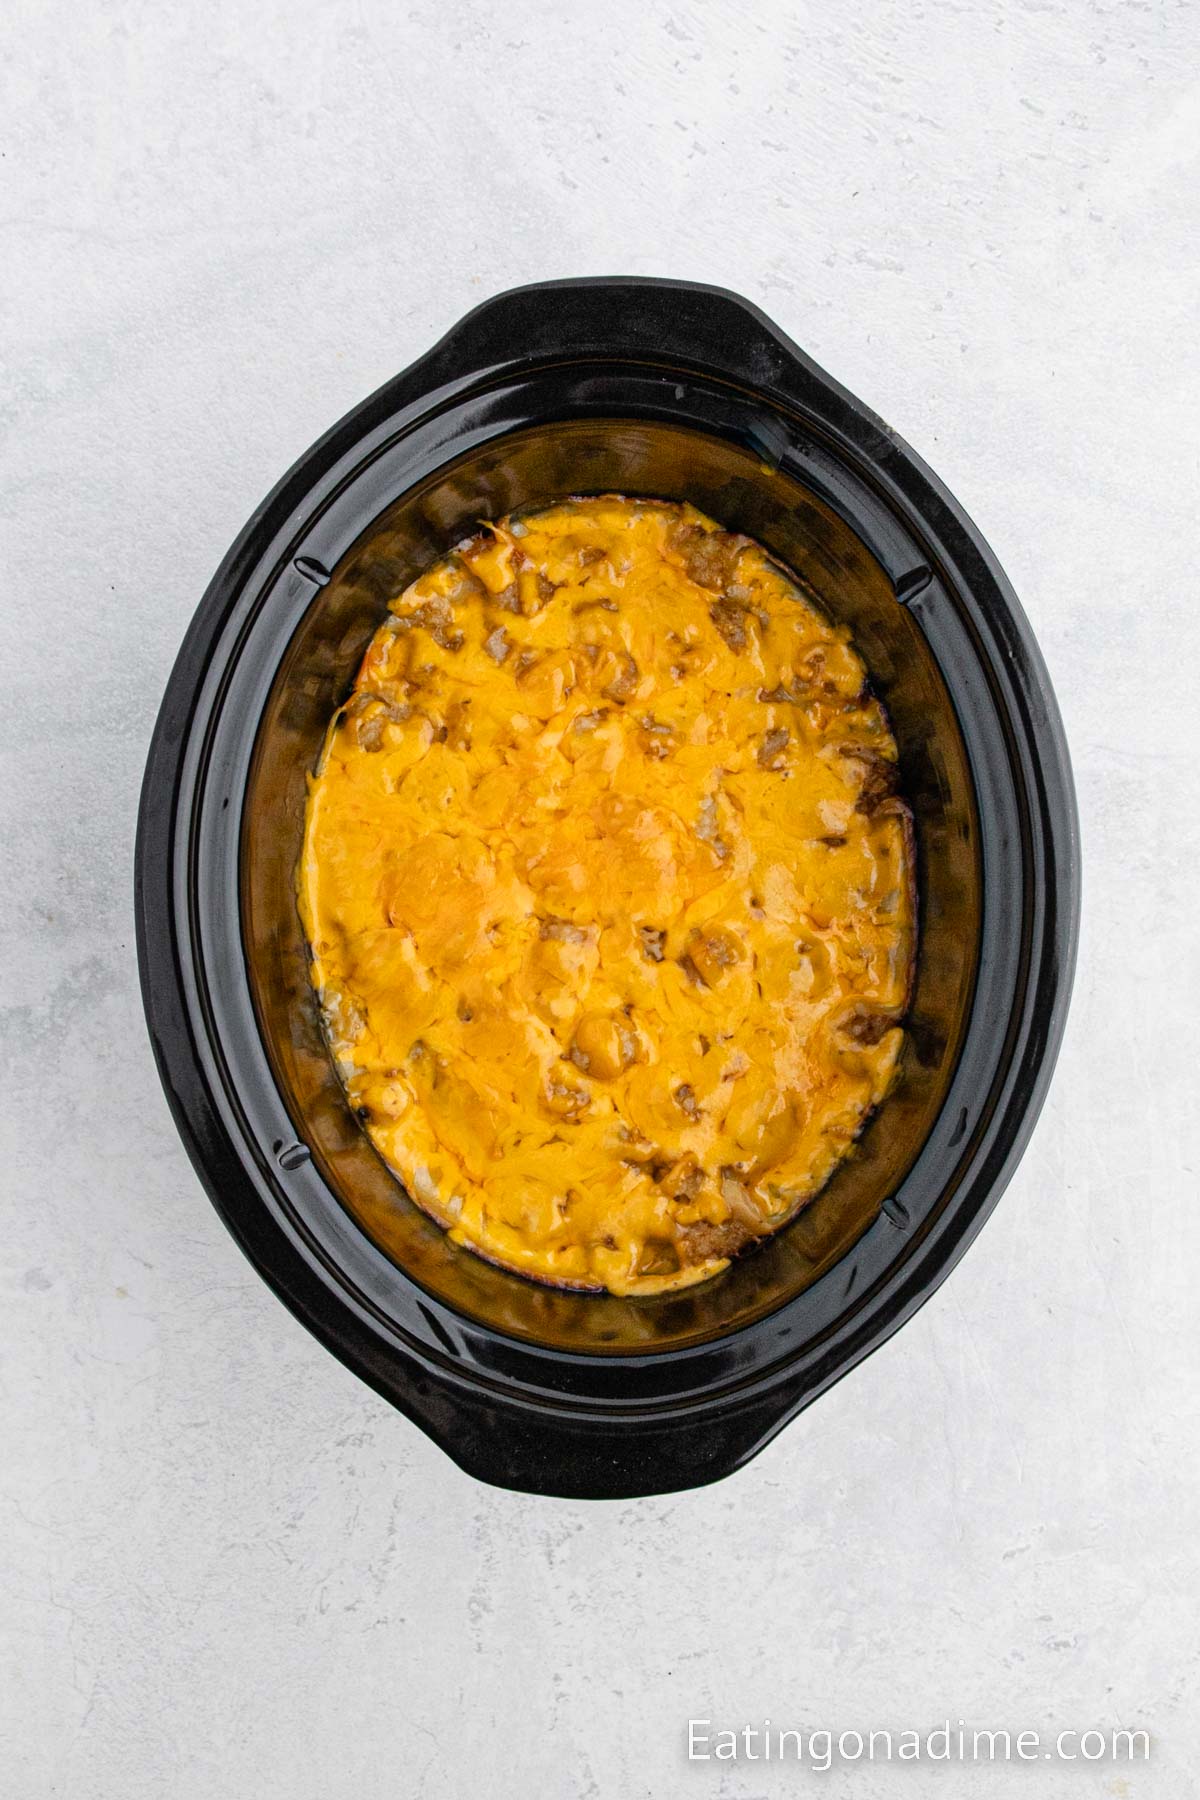 Topping the tater tot casserole with cheese in the slow cooker